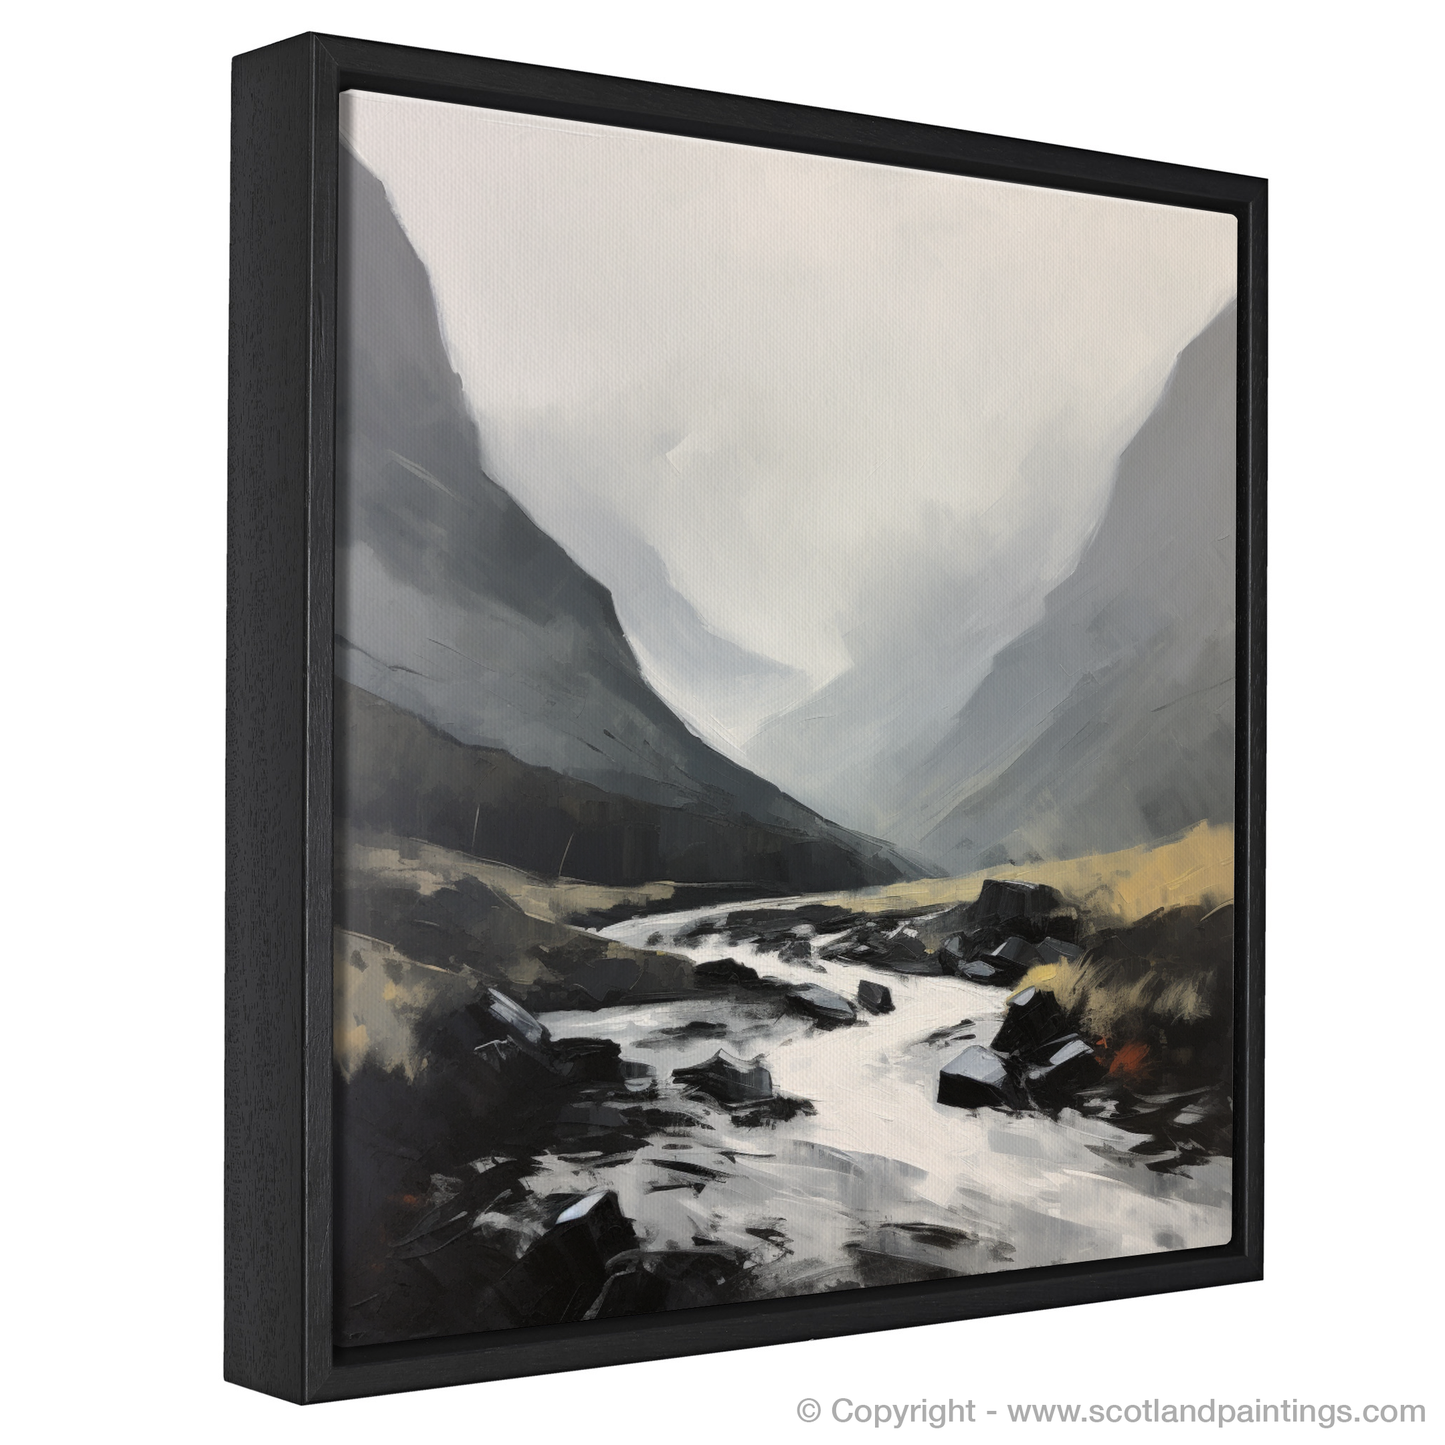 Painting and Art Print of Rolling fog in Glencoe entitled "Mists of Glencoe: An Expressionist Journey".